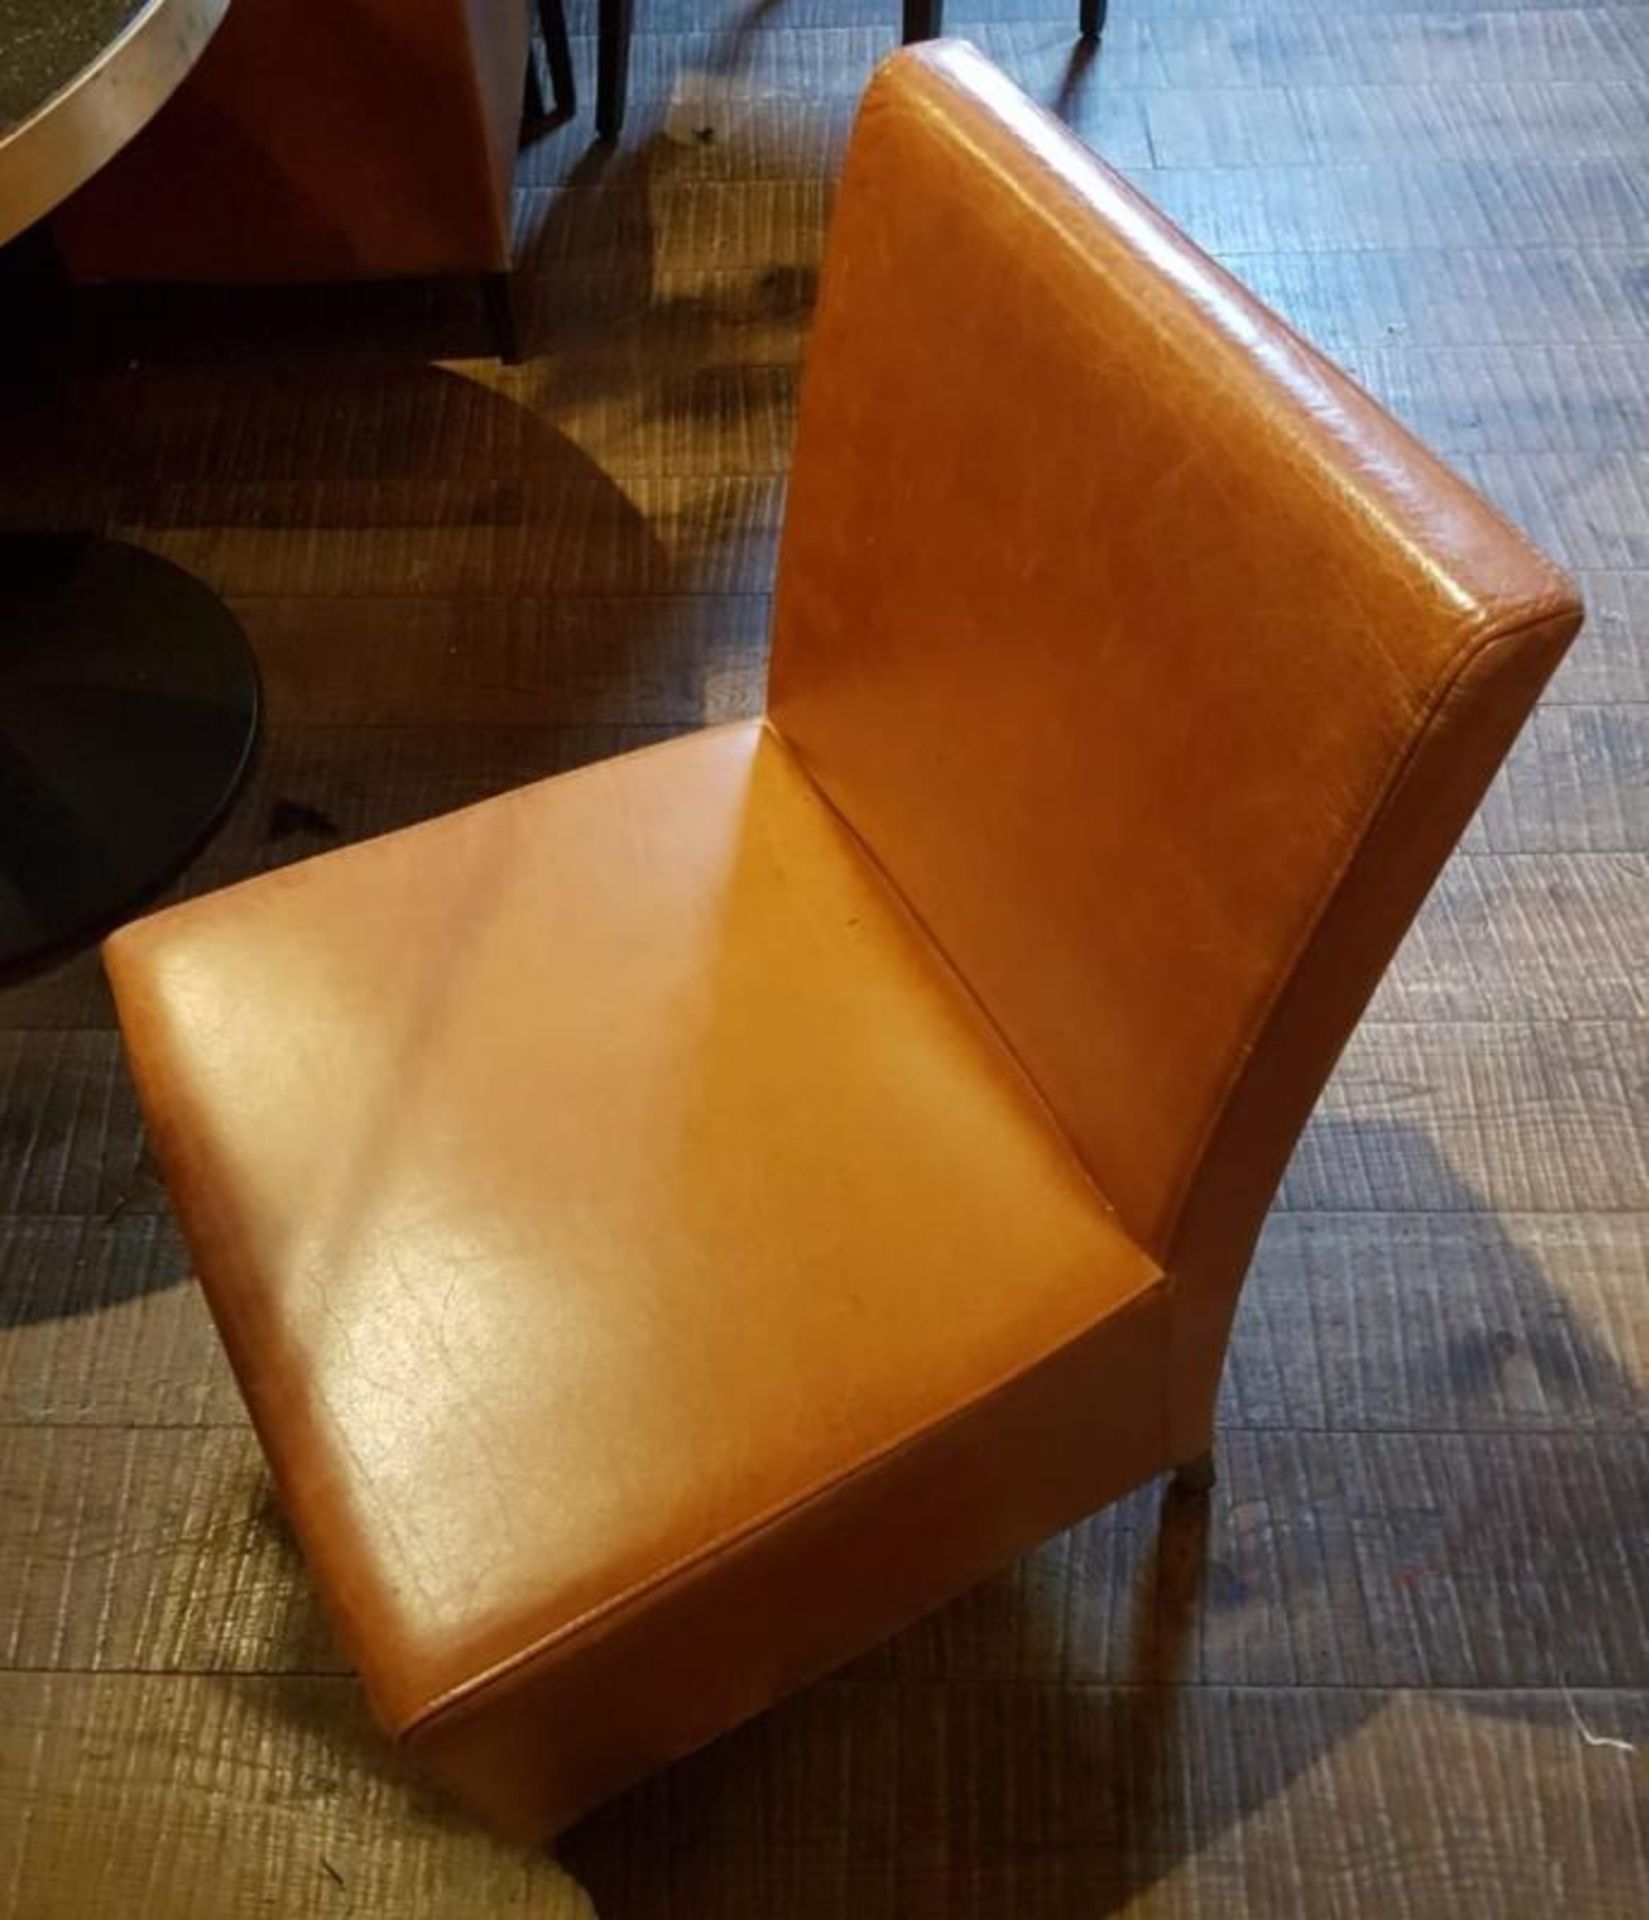 4 x Leather Upholstered Chairs In Tan - Recently Removed From A City Centre Steakhouse Restaurant - - Image 3 of 6